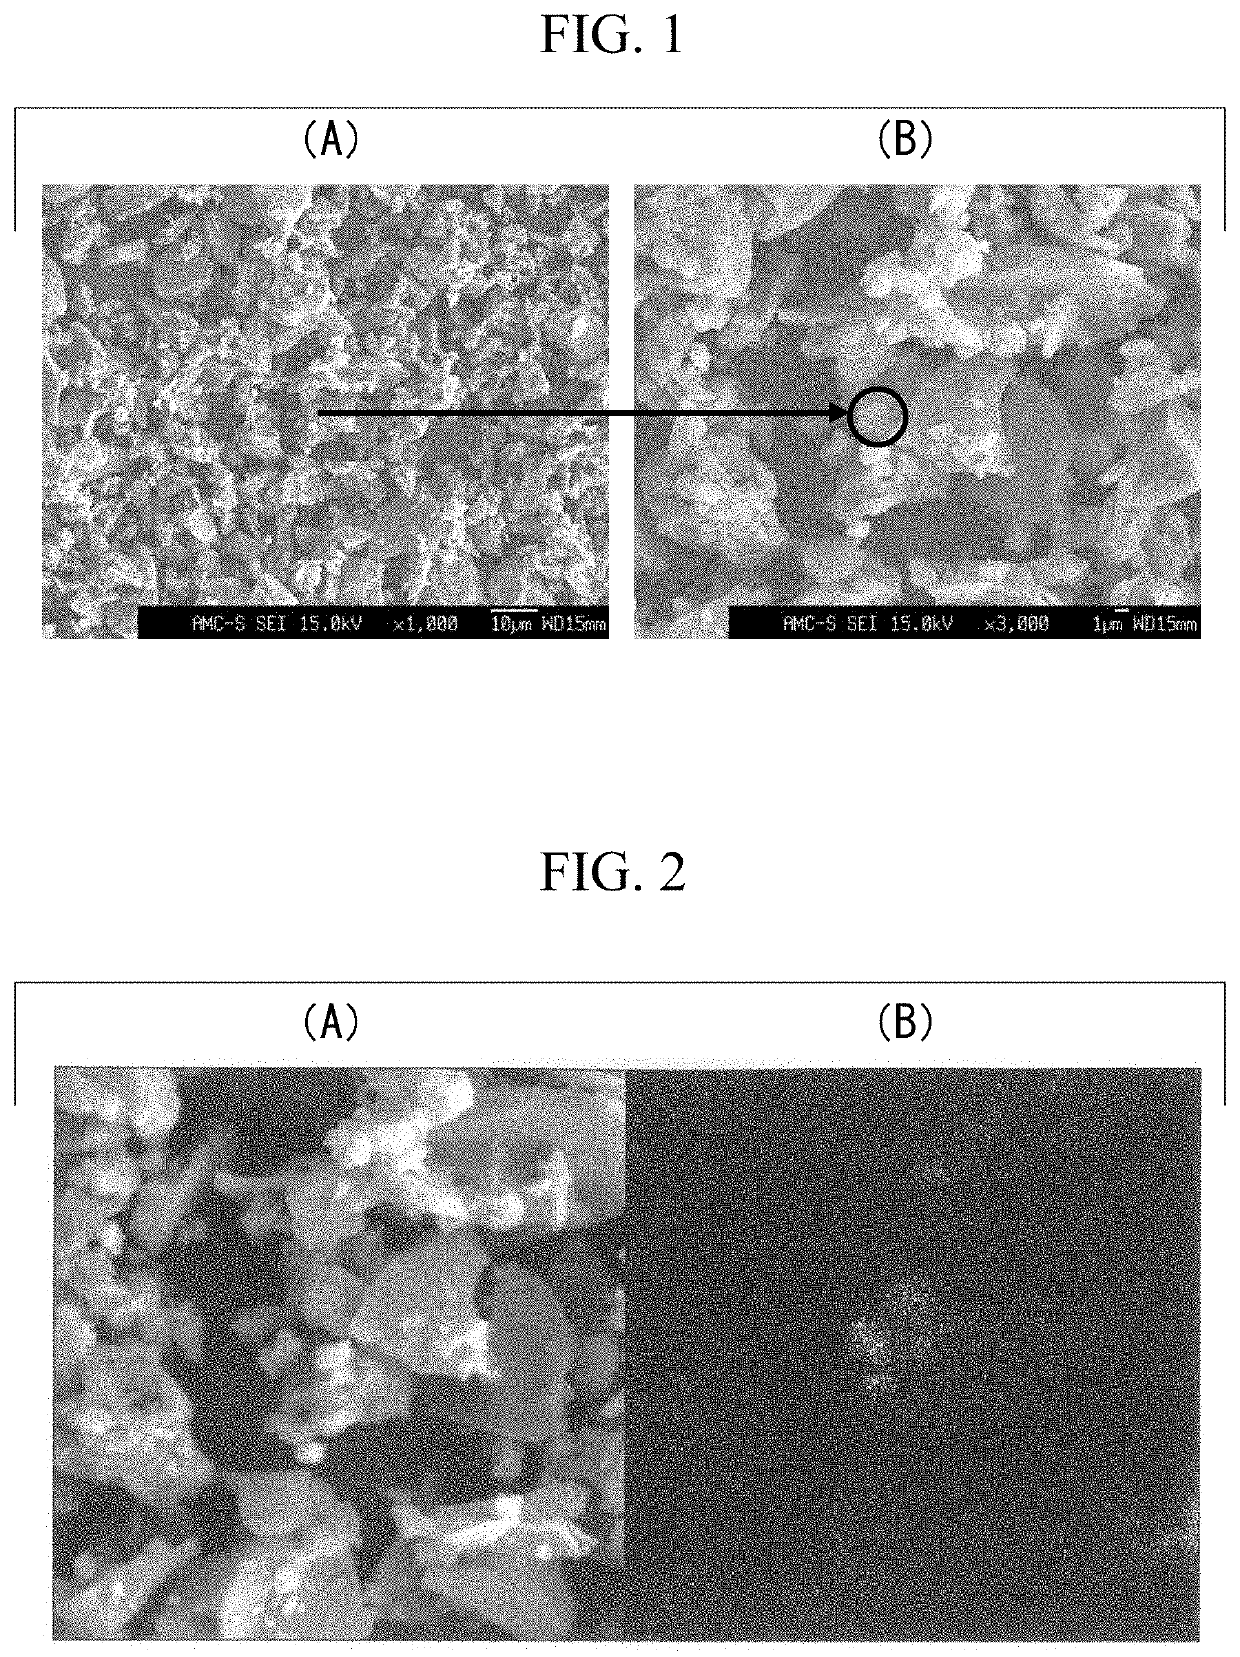 Rapid-hardening cement composition